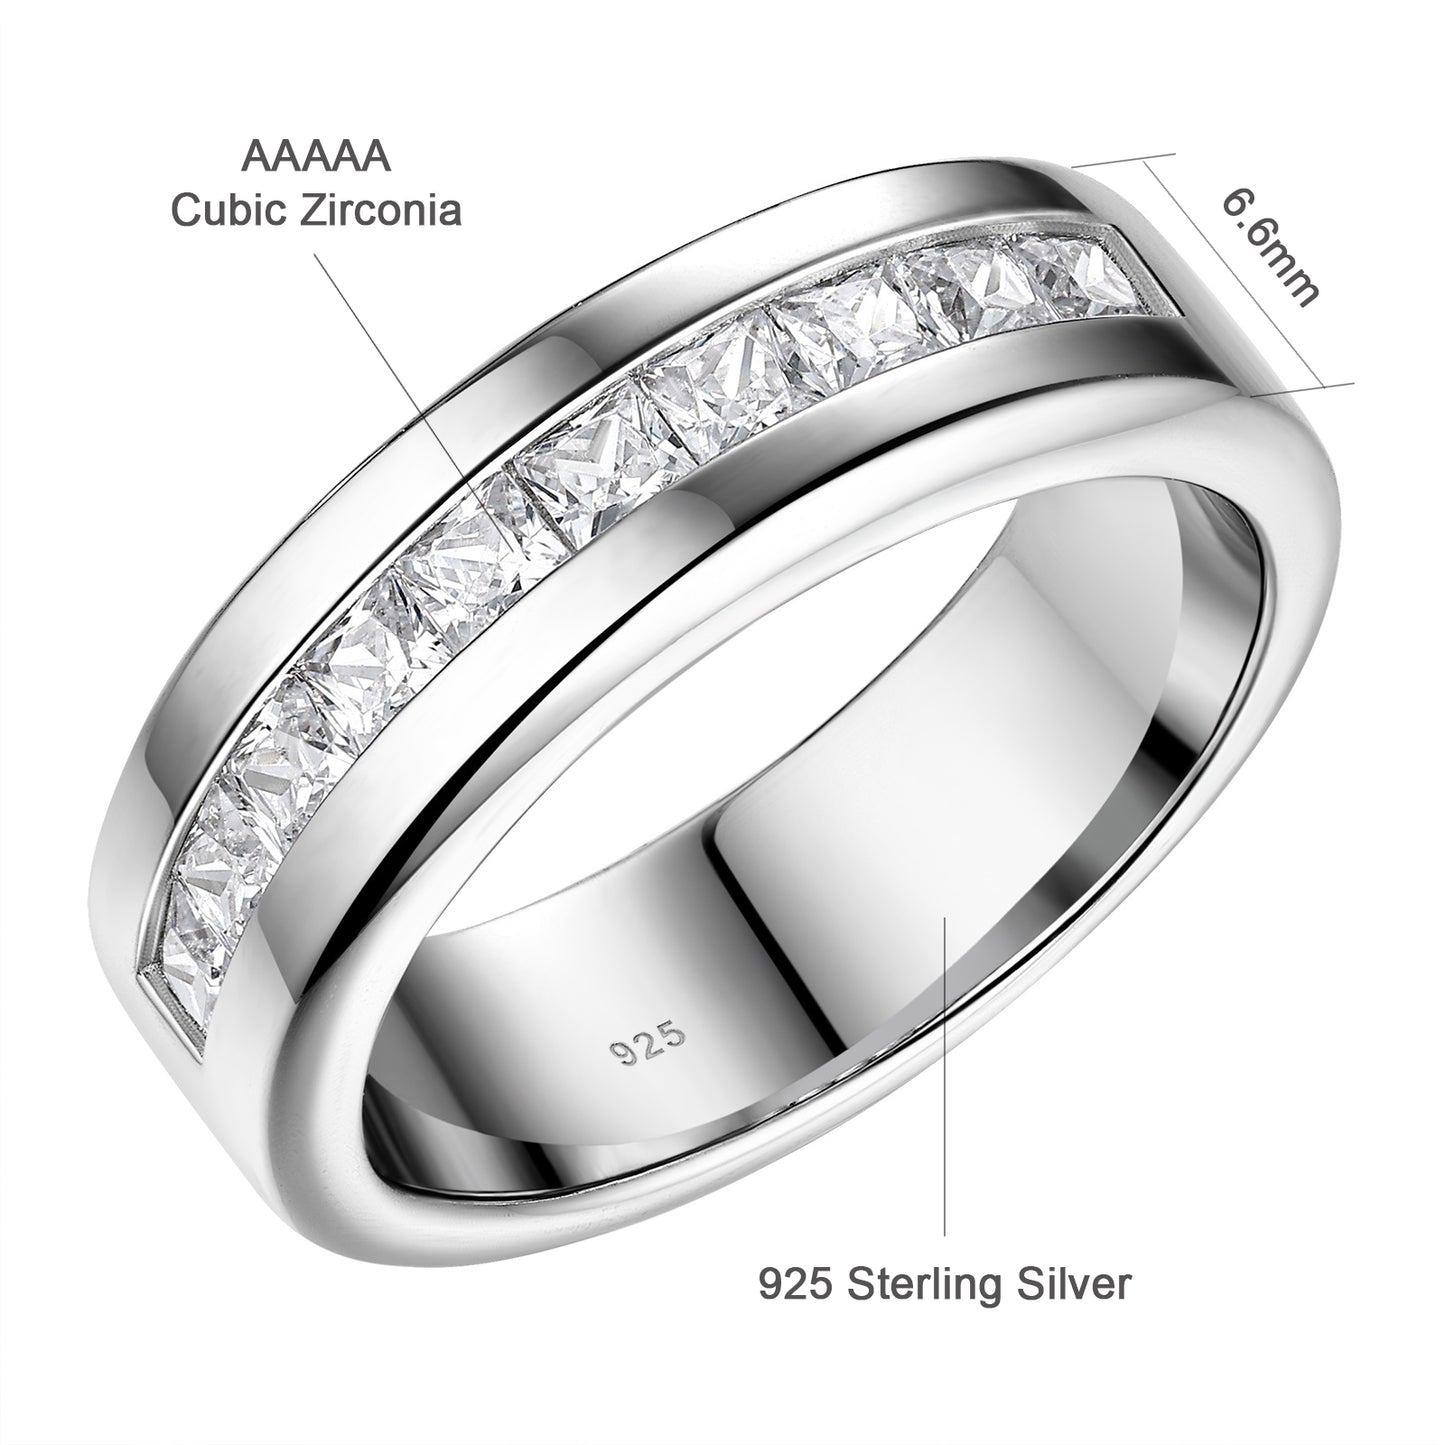 Newshe Men's Wedding Rings 925 Sterling Silver Ring 1ct 10 Large Princess Cut White AAAAA Cubic Zirconia Size 9